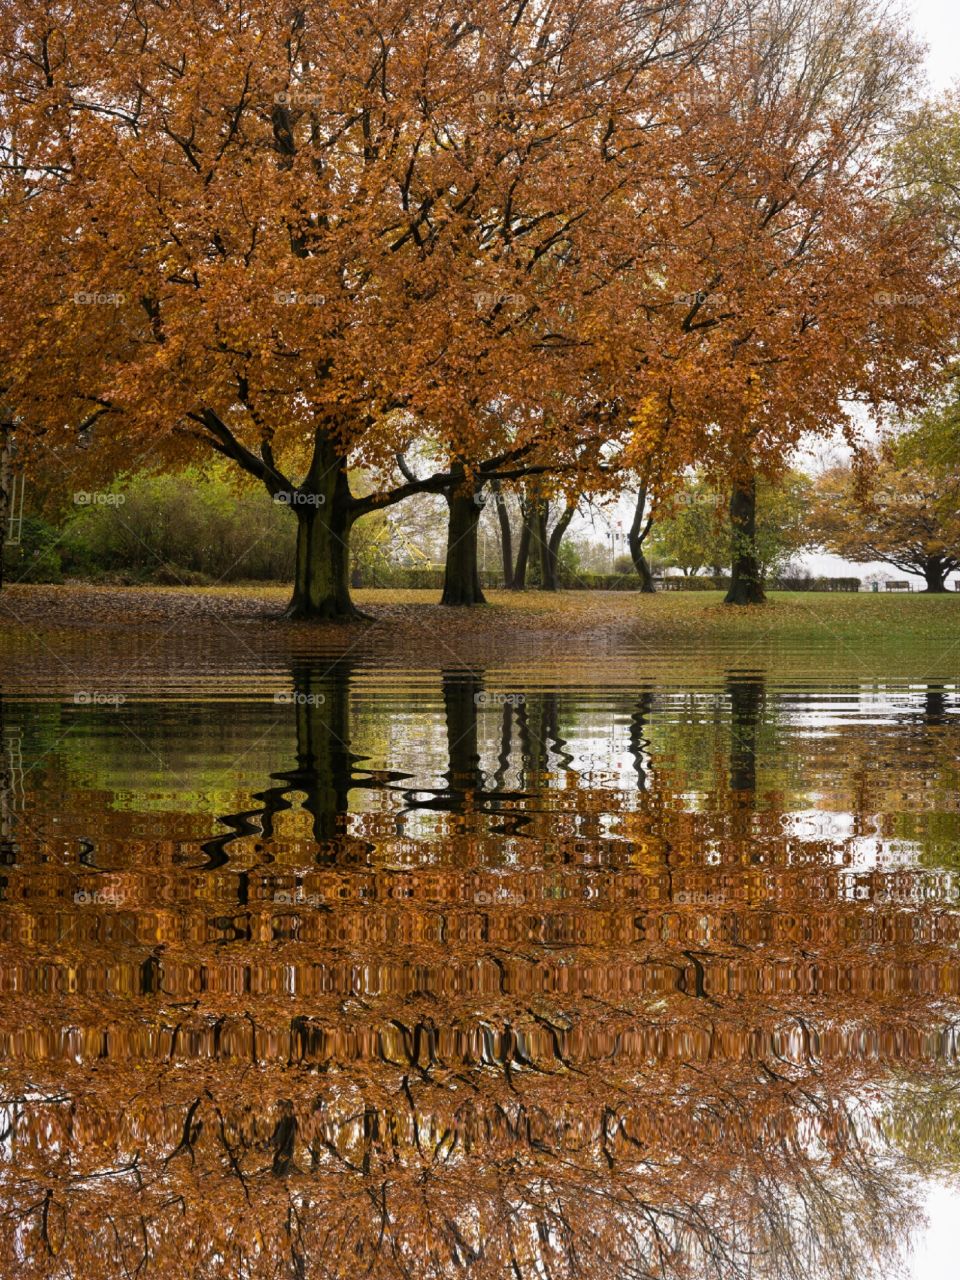 Puddle like Reflection of the trees in the park